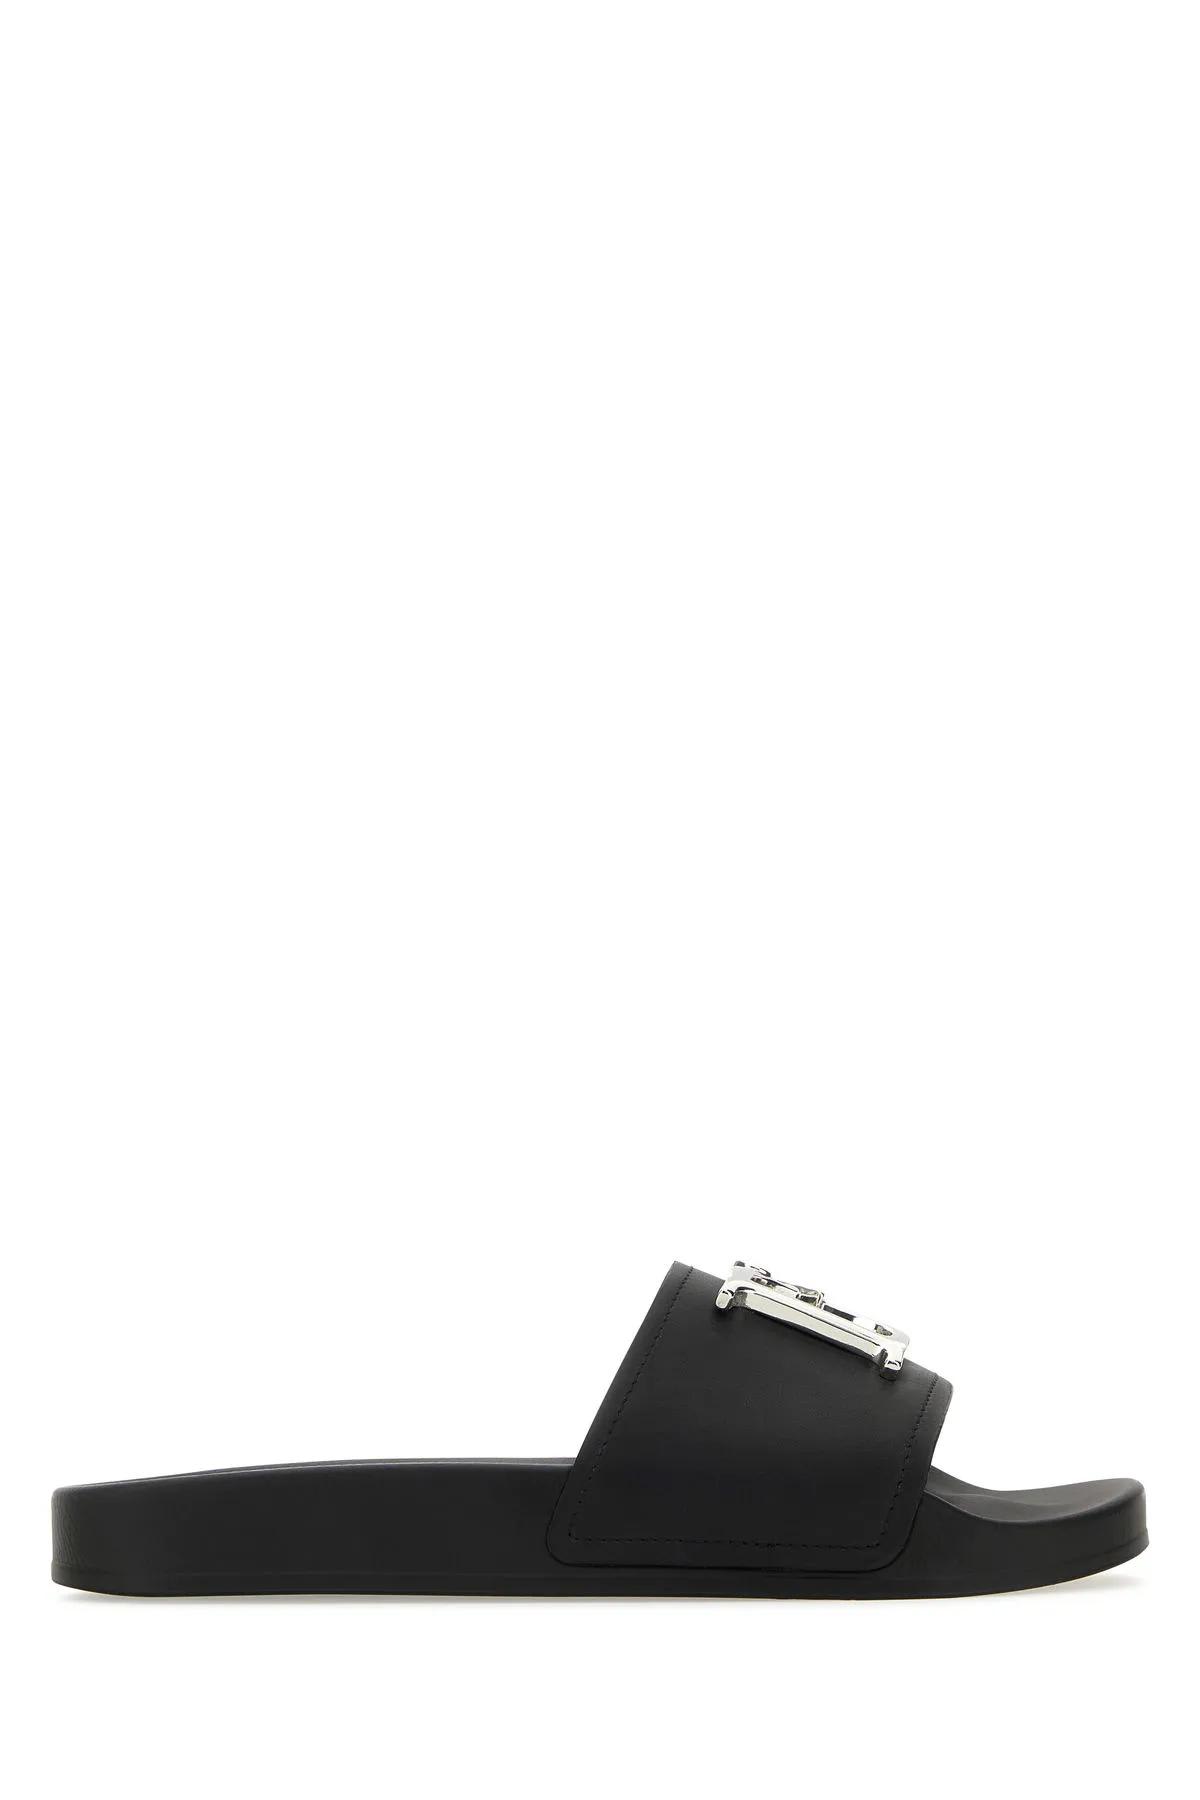 Black Leather D2 Statement Slippers